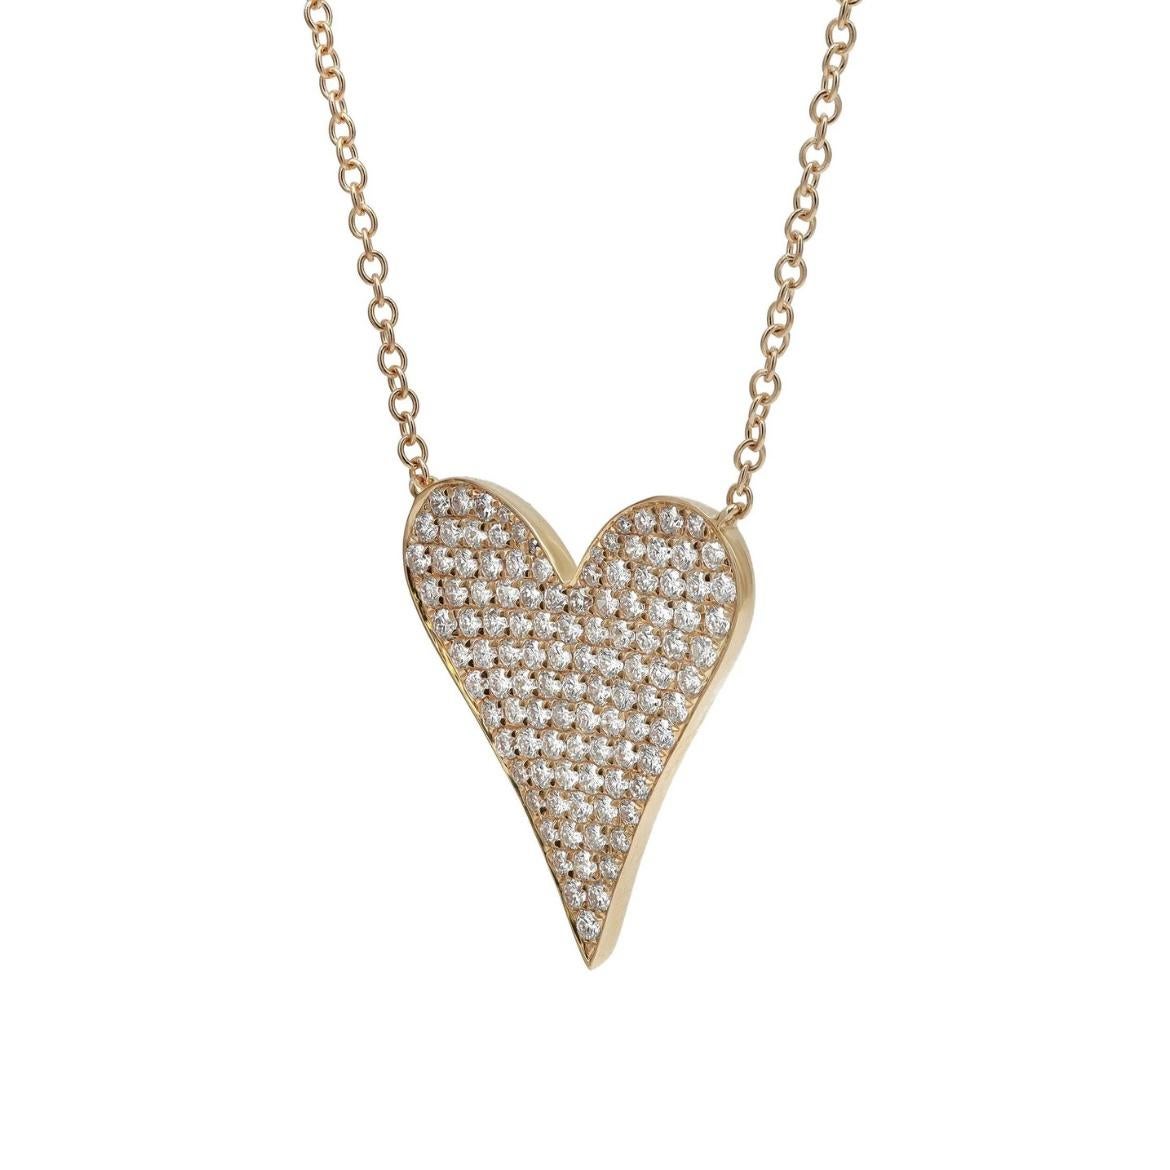 Discover timeless elegance with our exquisite Diamond Heart Necklace—a captivating masterpiece crafted in high-polished solid 18k yellow gold. The delicate heart-shaped pendant, adorned with tiny brilliant round-cut diamonds, showcases a dazzling